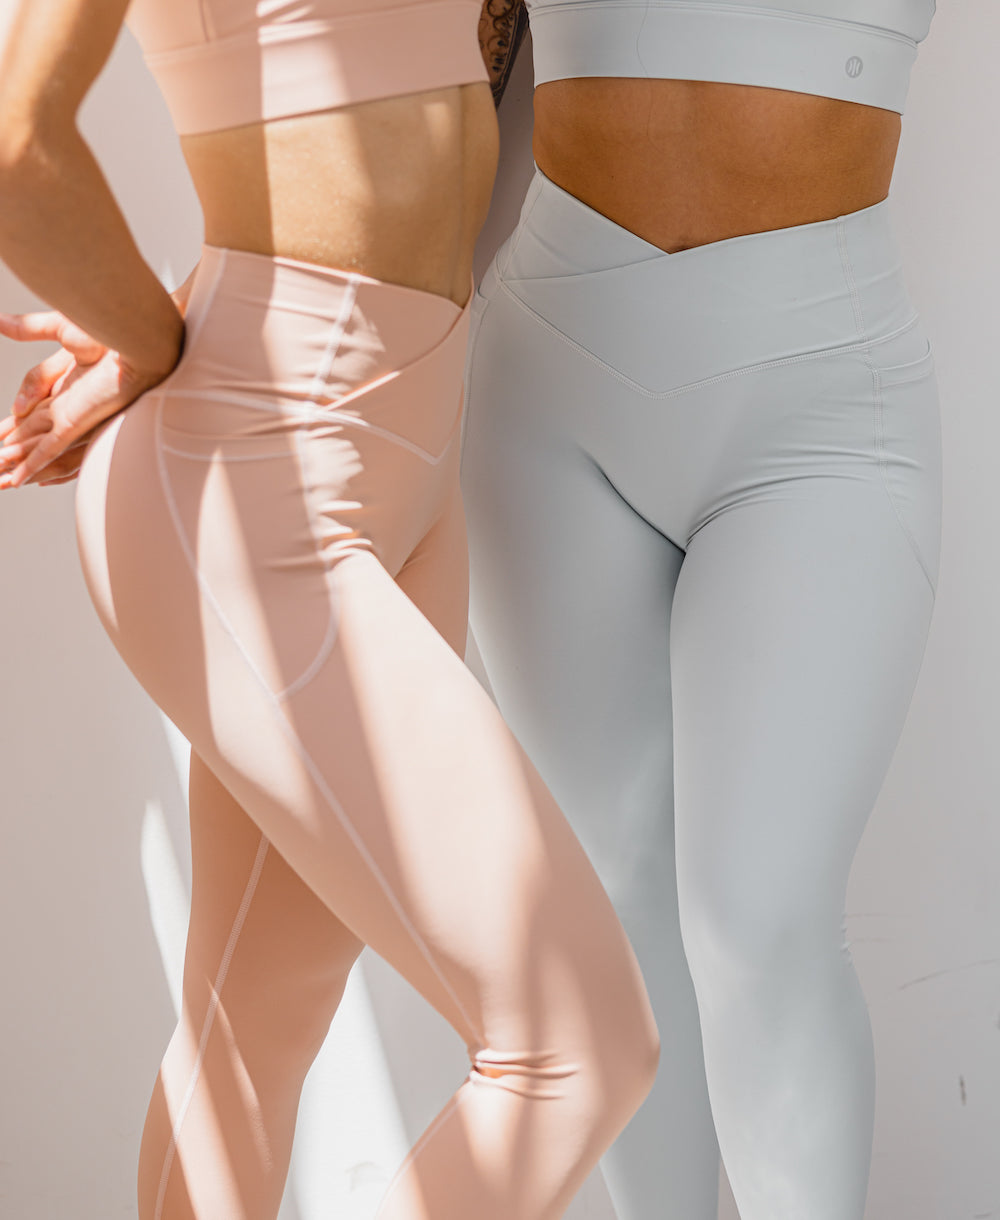 Astoria Activewear Momentum Full Length Legging Pink - $40 (42% Off Retail)  - From Emily